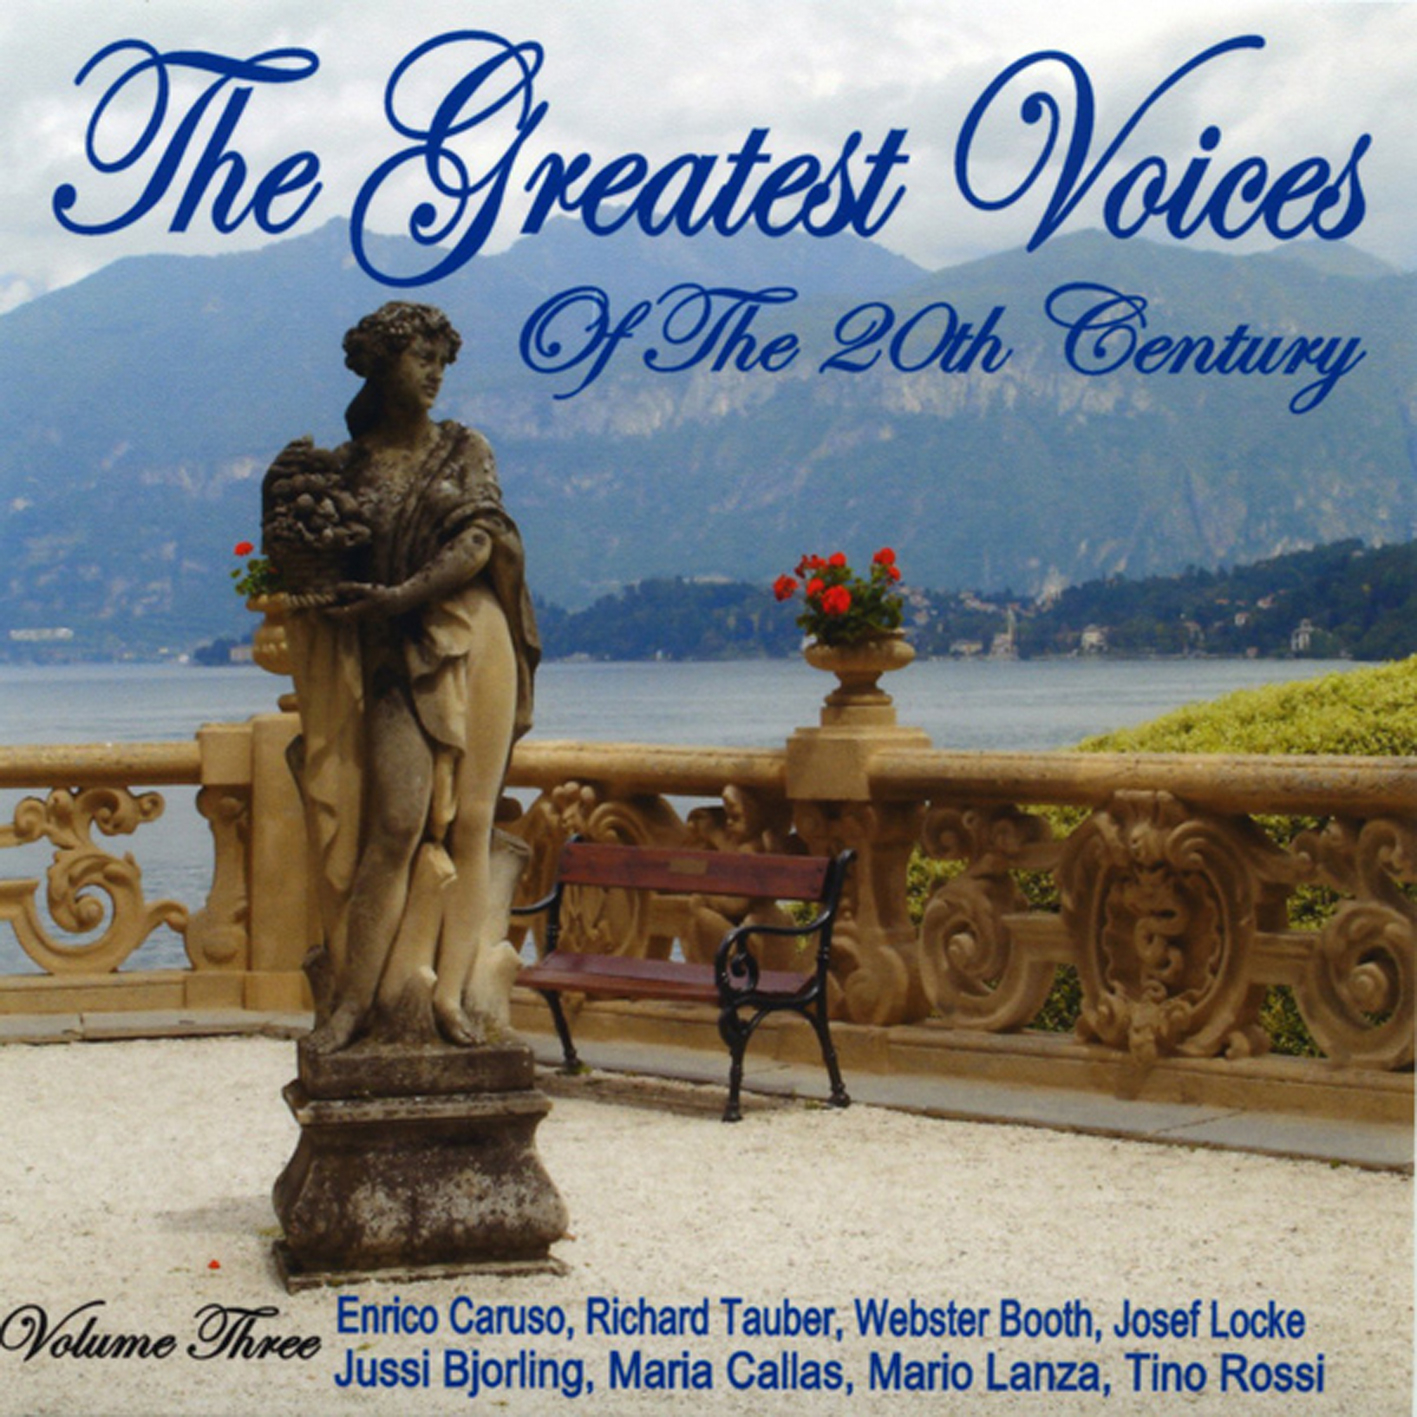 The Greatest Voices Of The 20th Century - Vol. Three